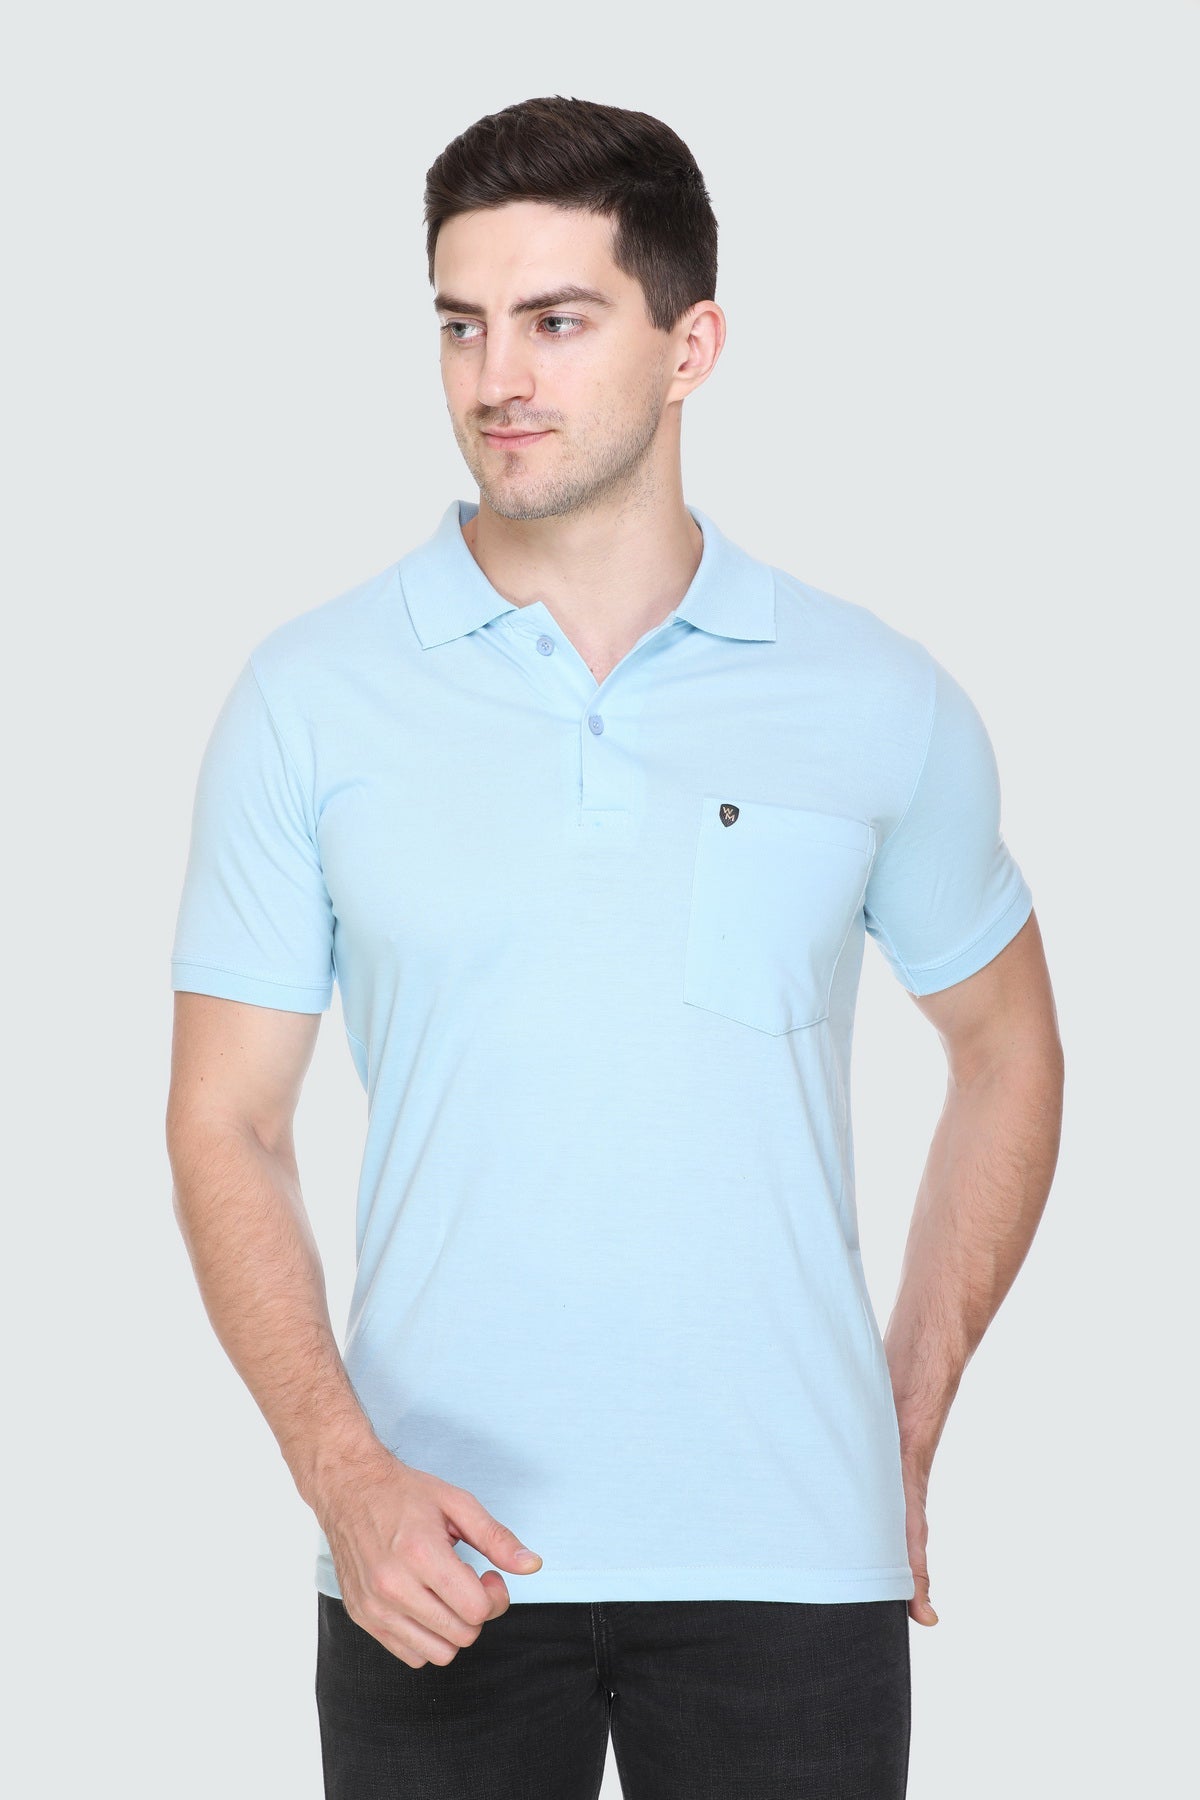 White Moon Men Tshirt Cotton Solid Regular Fit Polo T-Shirt (Sky) whitemoon.in